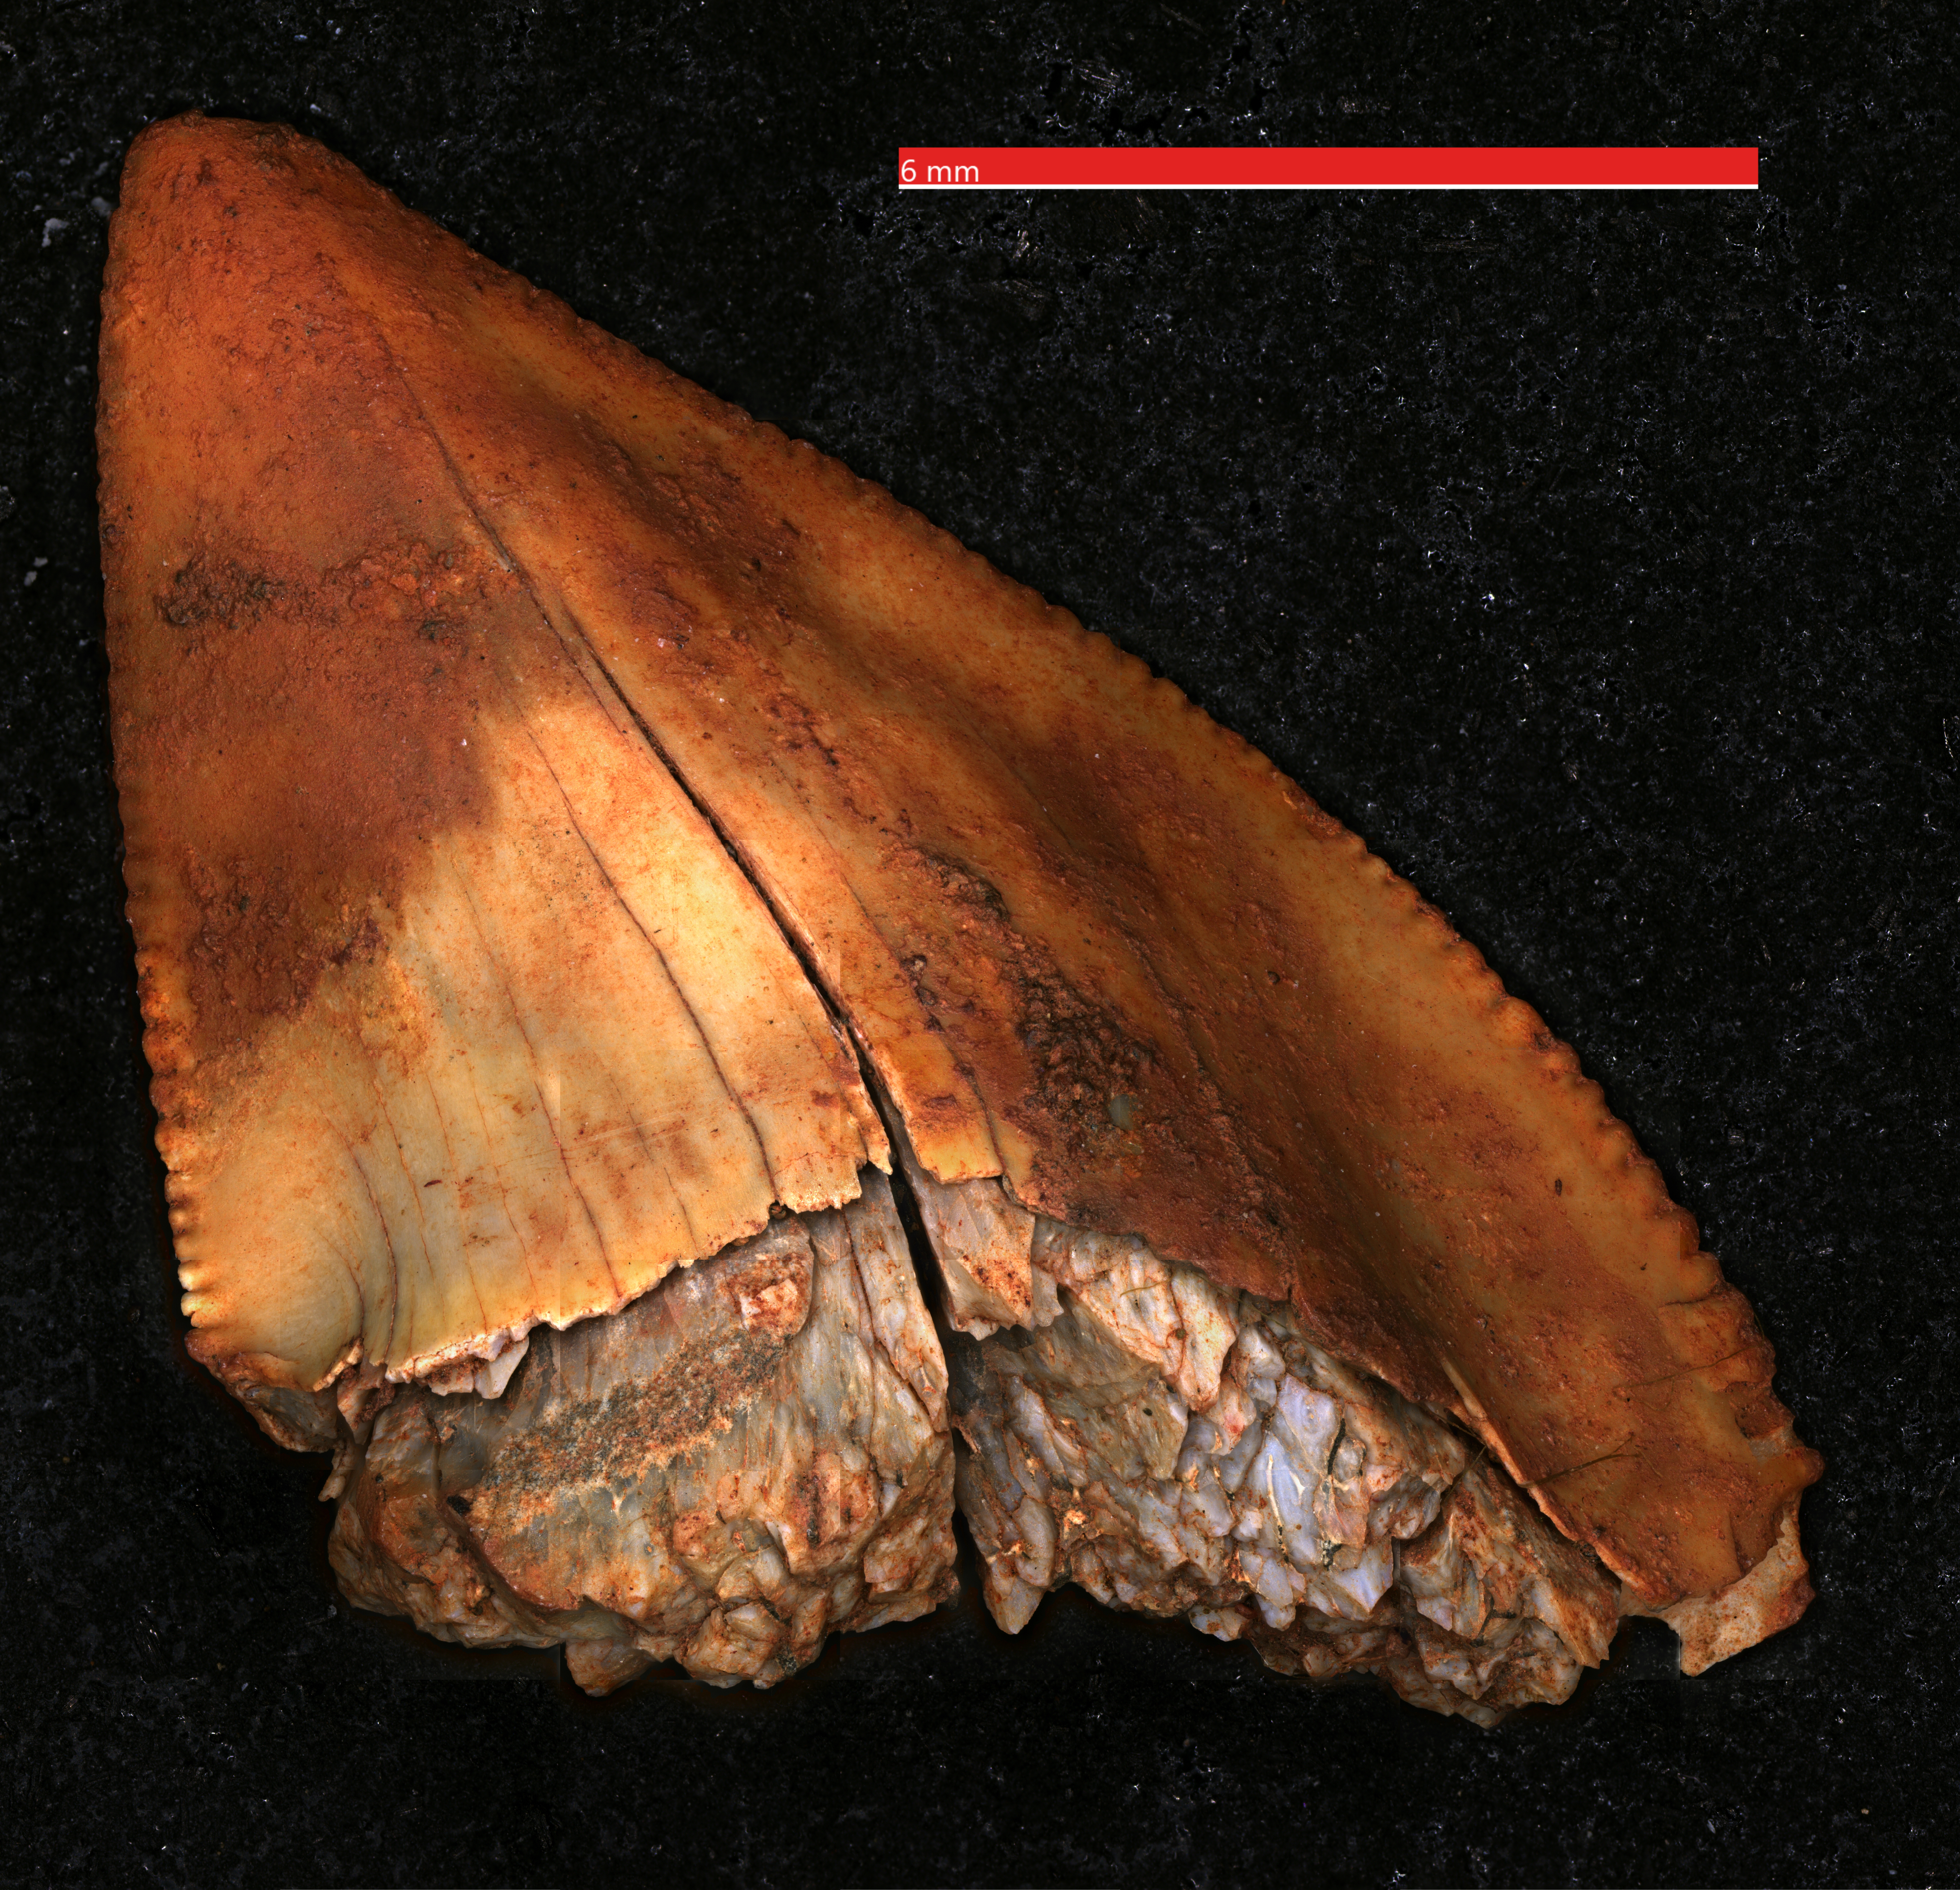 Fossil shark tooth, genus Squalicorax, from the Coleraine Formation in Minnesota.